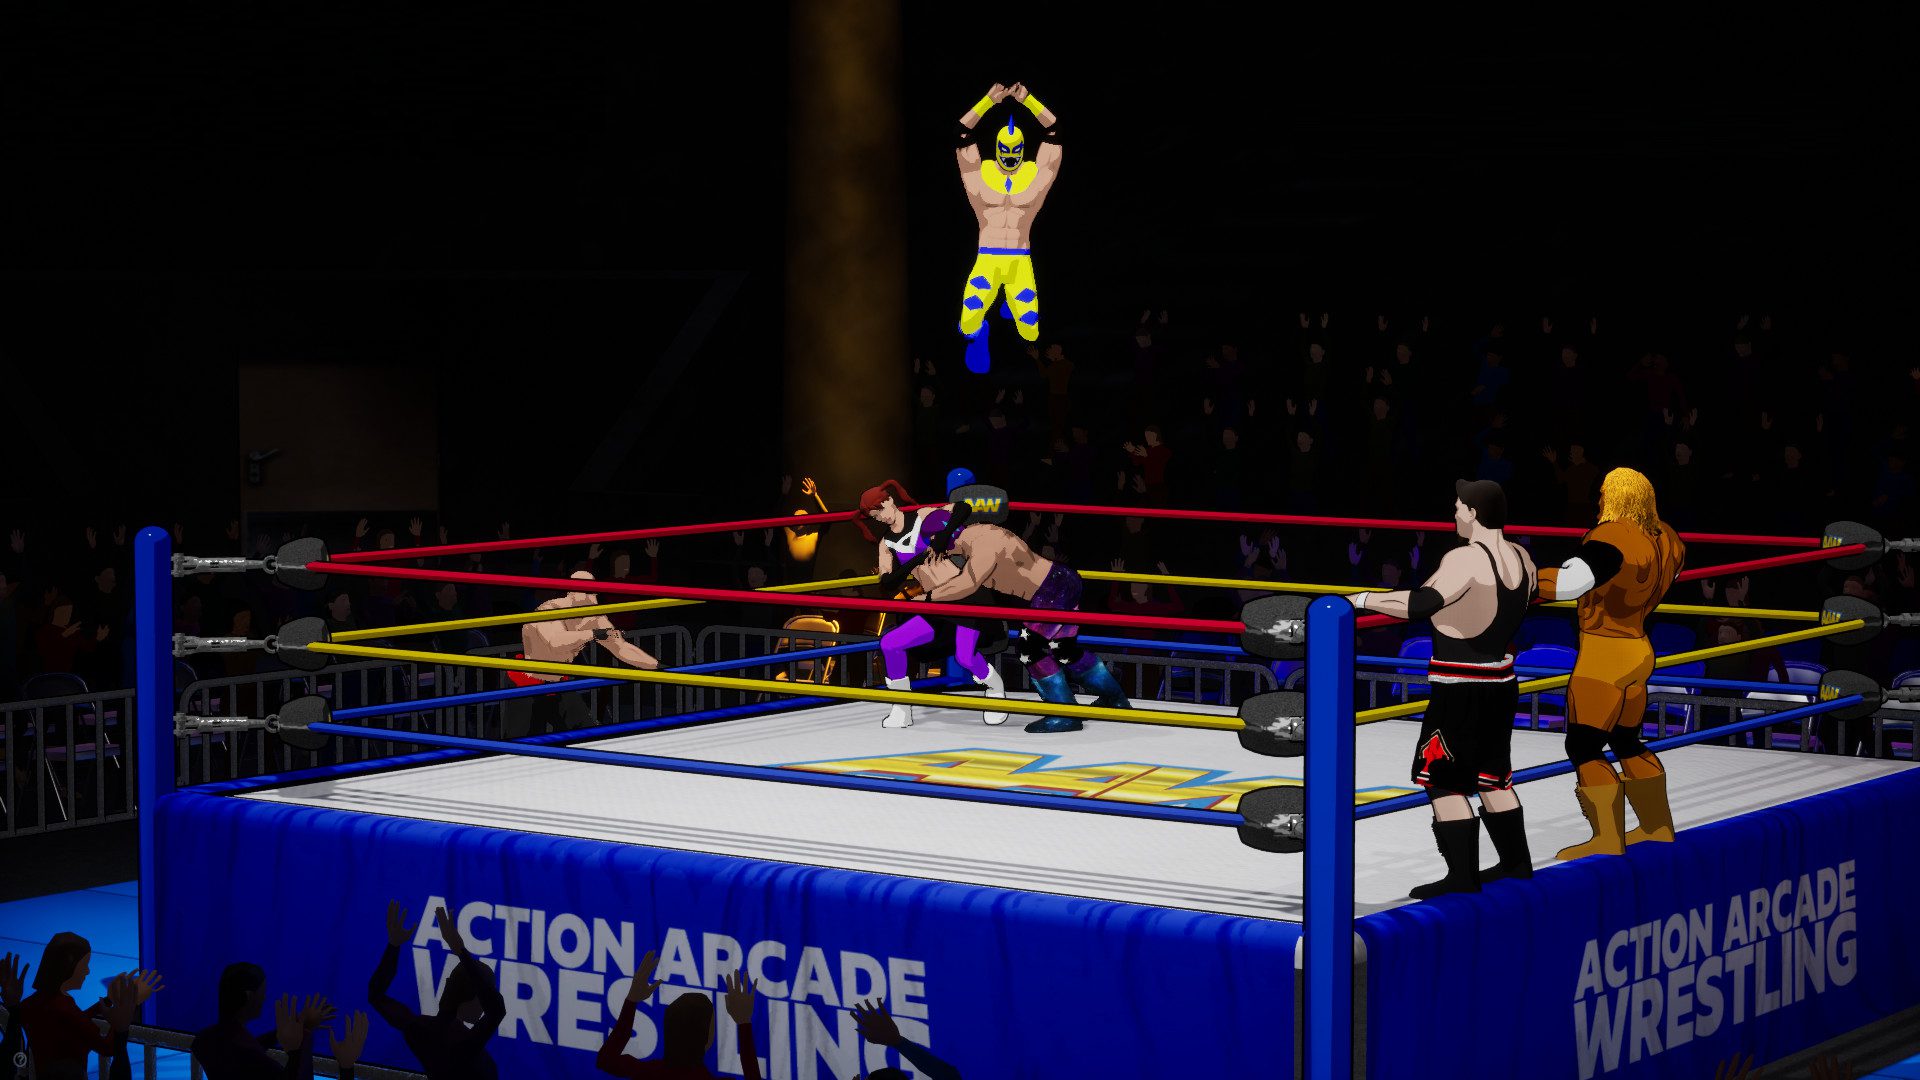 ‘Action Arcade Wrestling’ Looks To Bring Back The Days Of Classic Arcade Wrestling